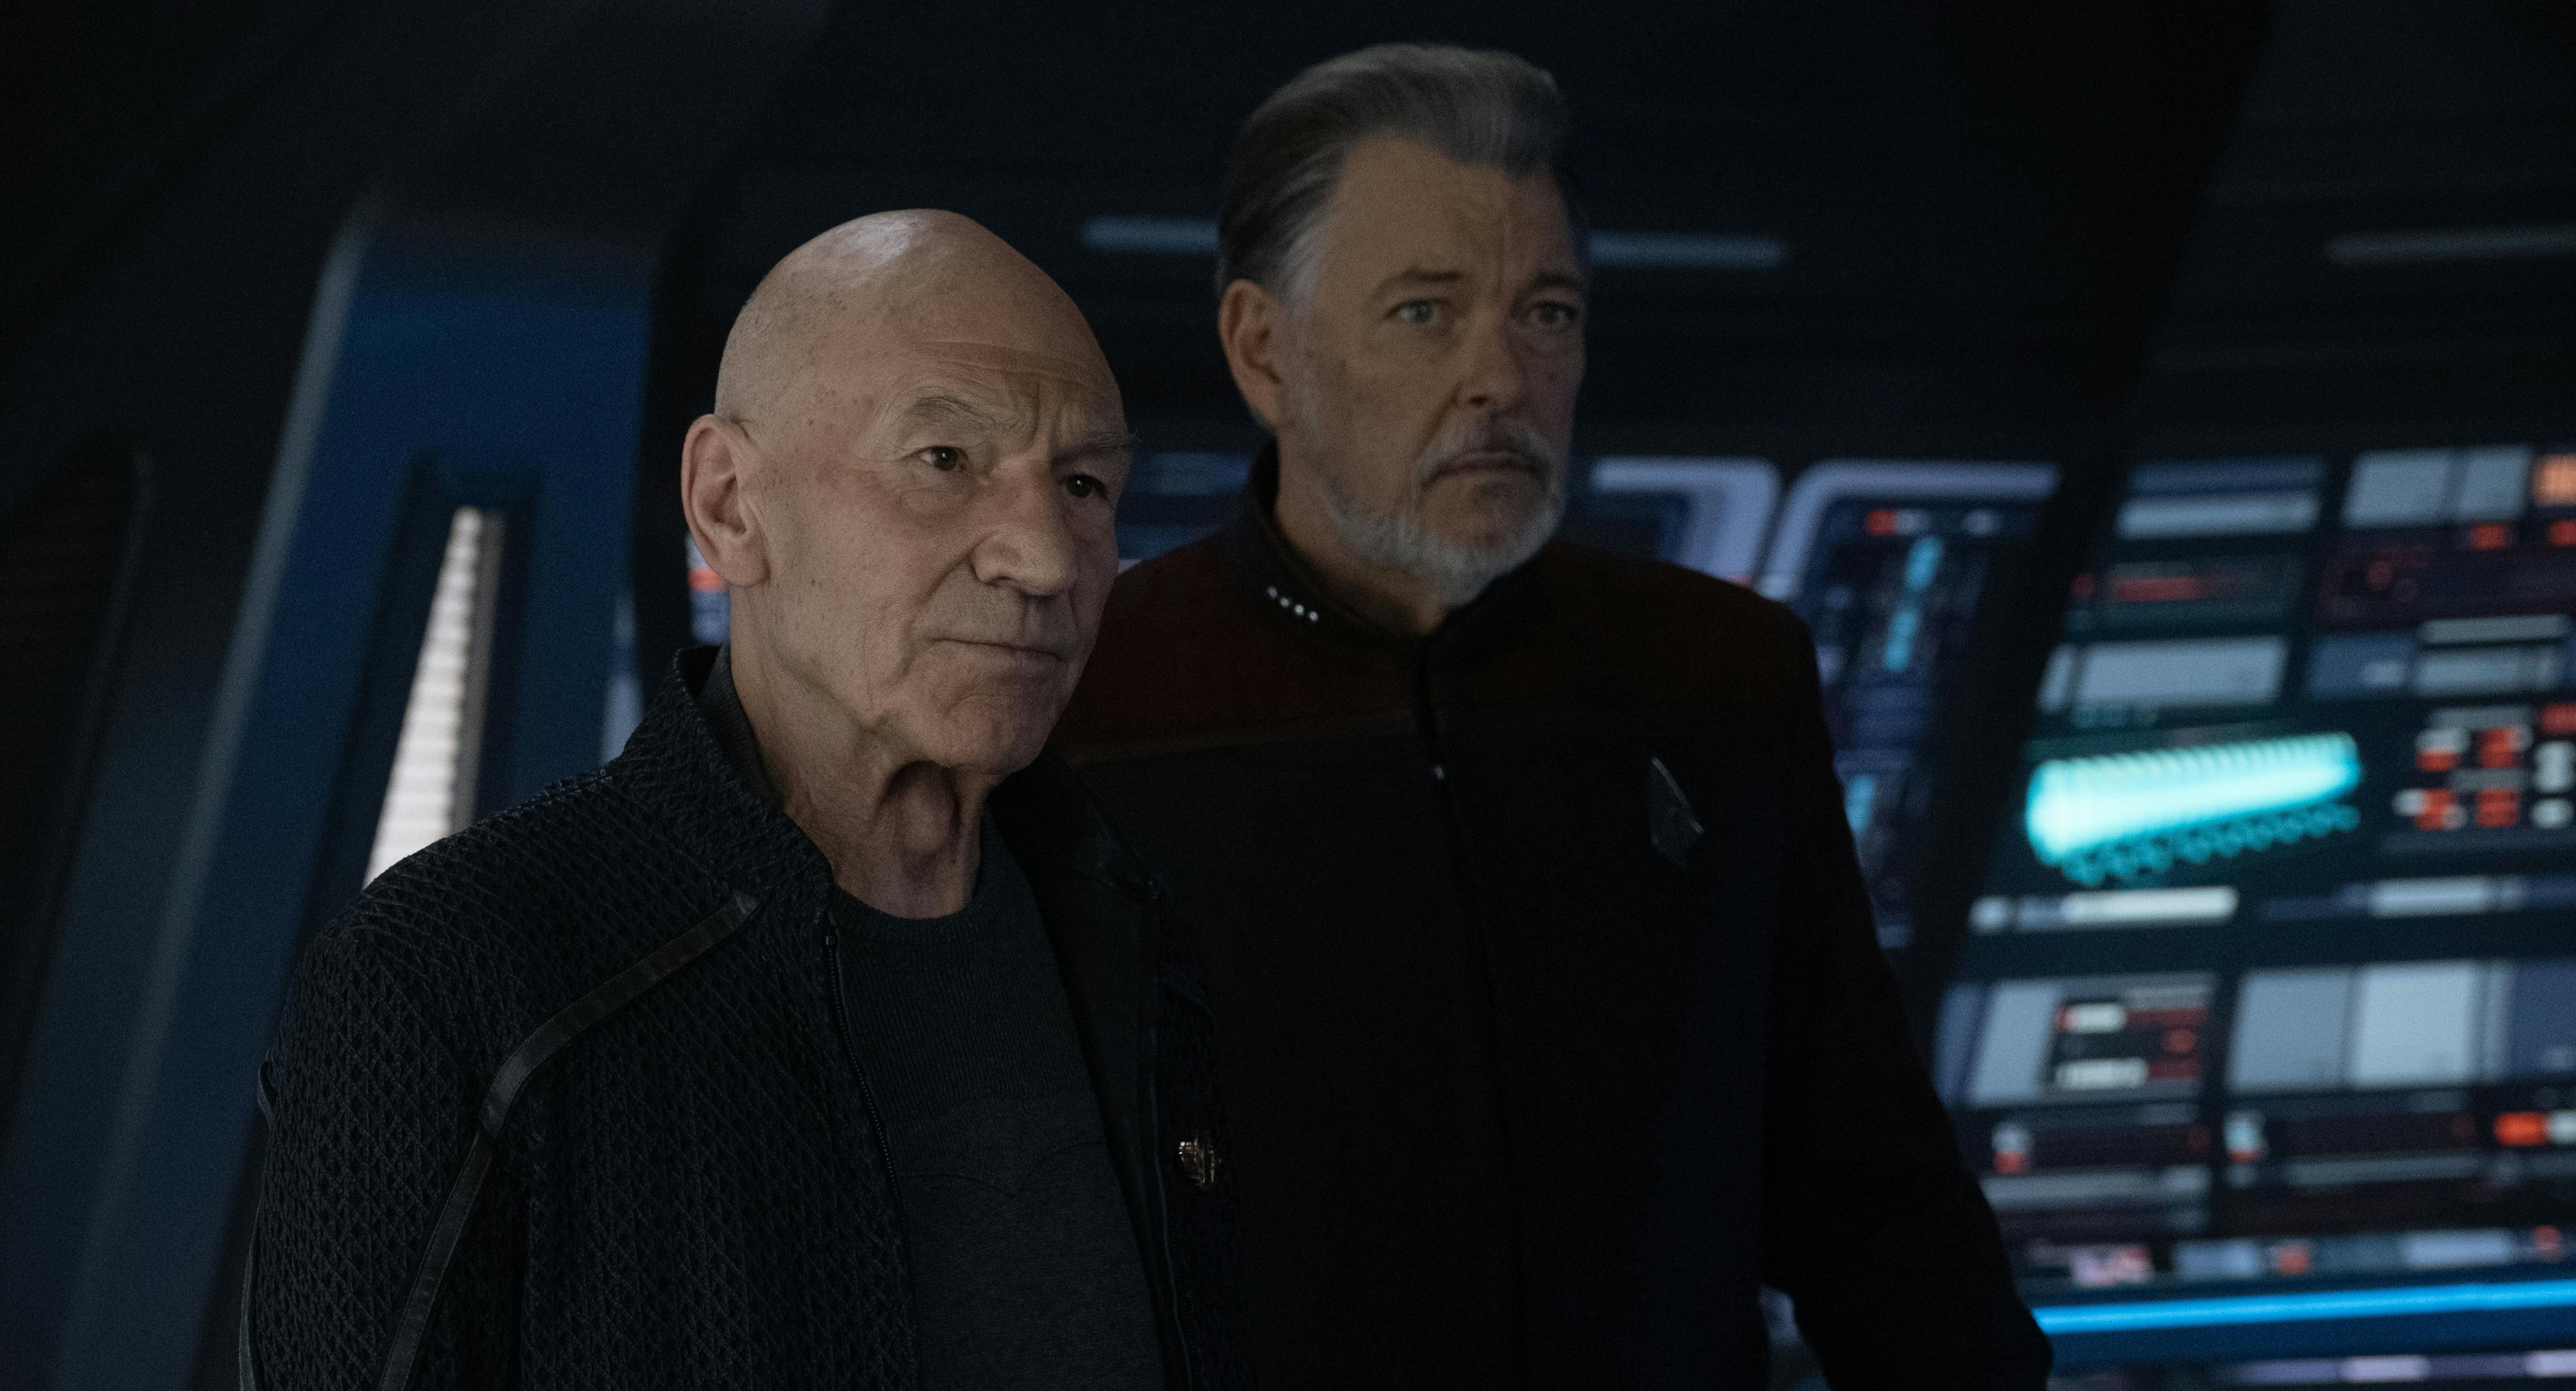 On the Bridge of the Titan, a grim Picard and Riker look ahead